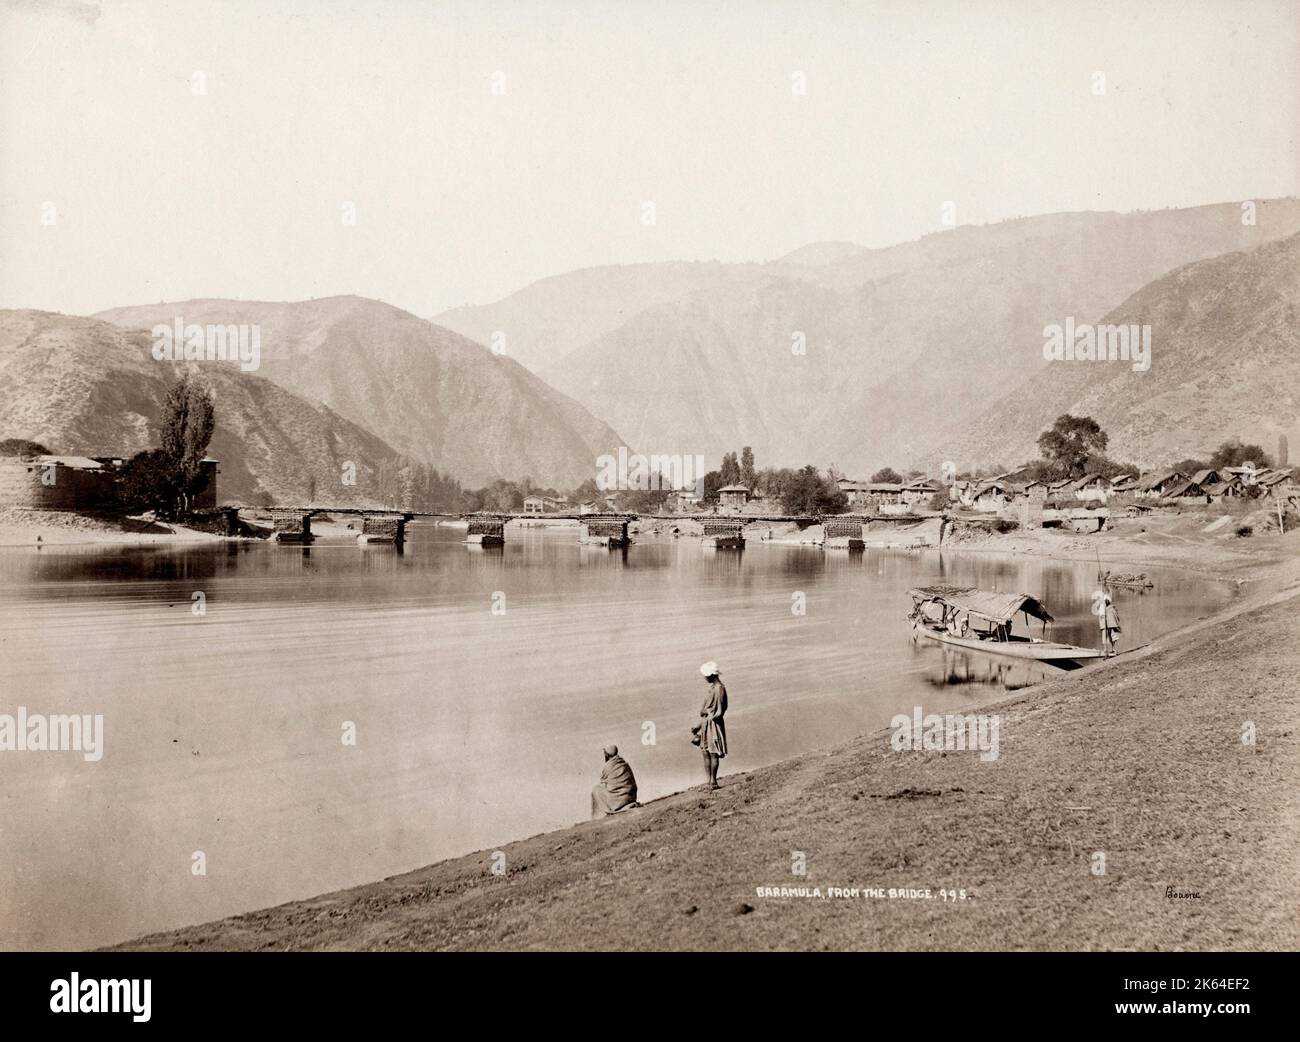 19th century vintage photograph: Baramulla is a city and a municipality in the Baramulla district in the Indian union territory of Jammu and Kashmir. It is on the bank of the Jhelum River downstream from Srinagar, the state capital. The city was earlier known as Vārāhamūla. Stock Photo